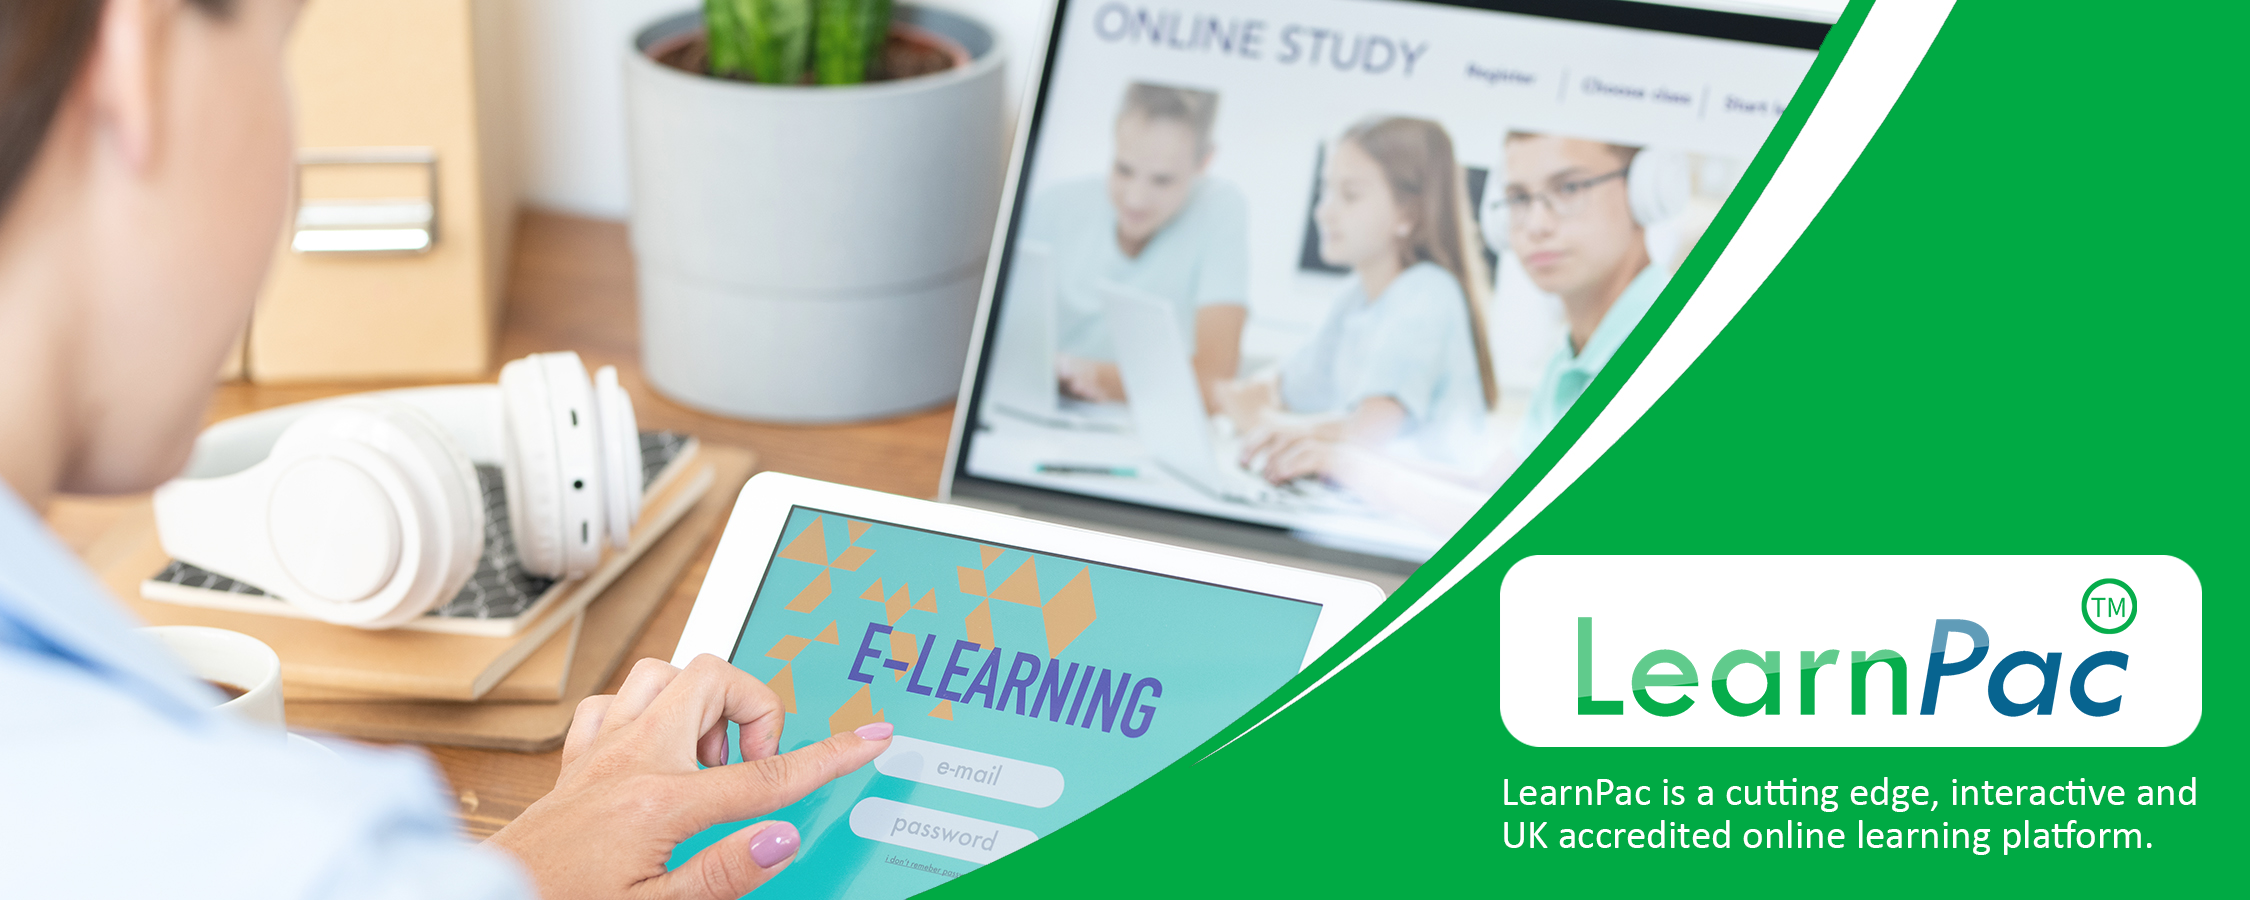 Care Certificate Training Courses - 15 Standards - Online Learning Courses - E-Learning Courses - LearnPac Systems UK -